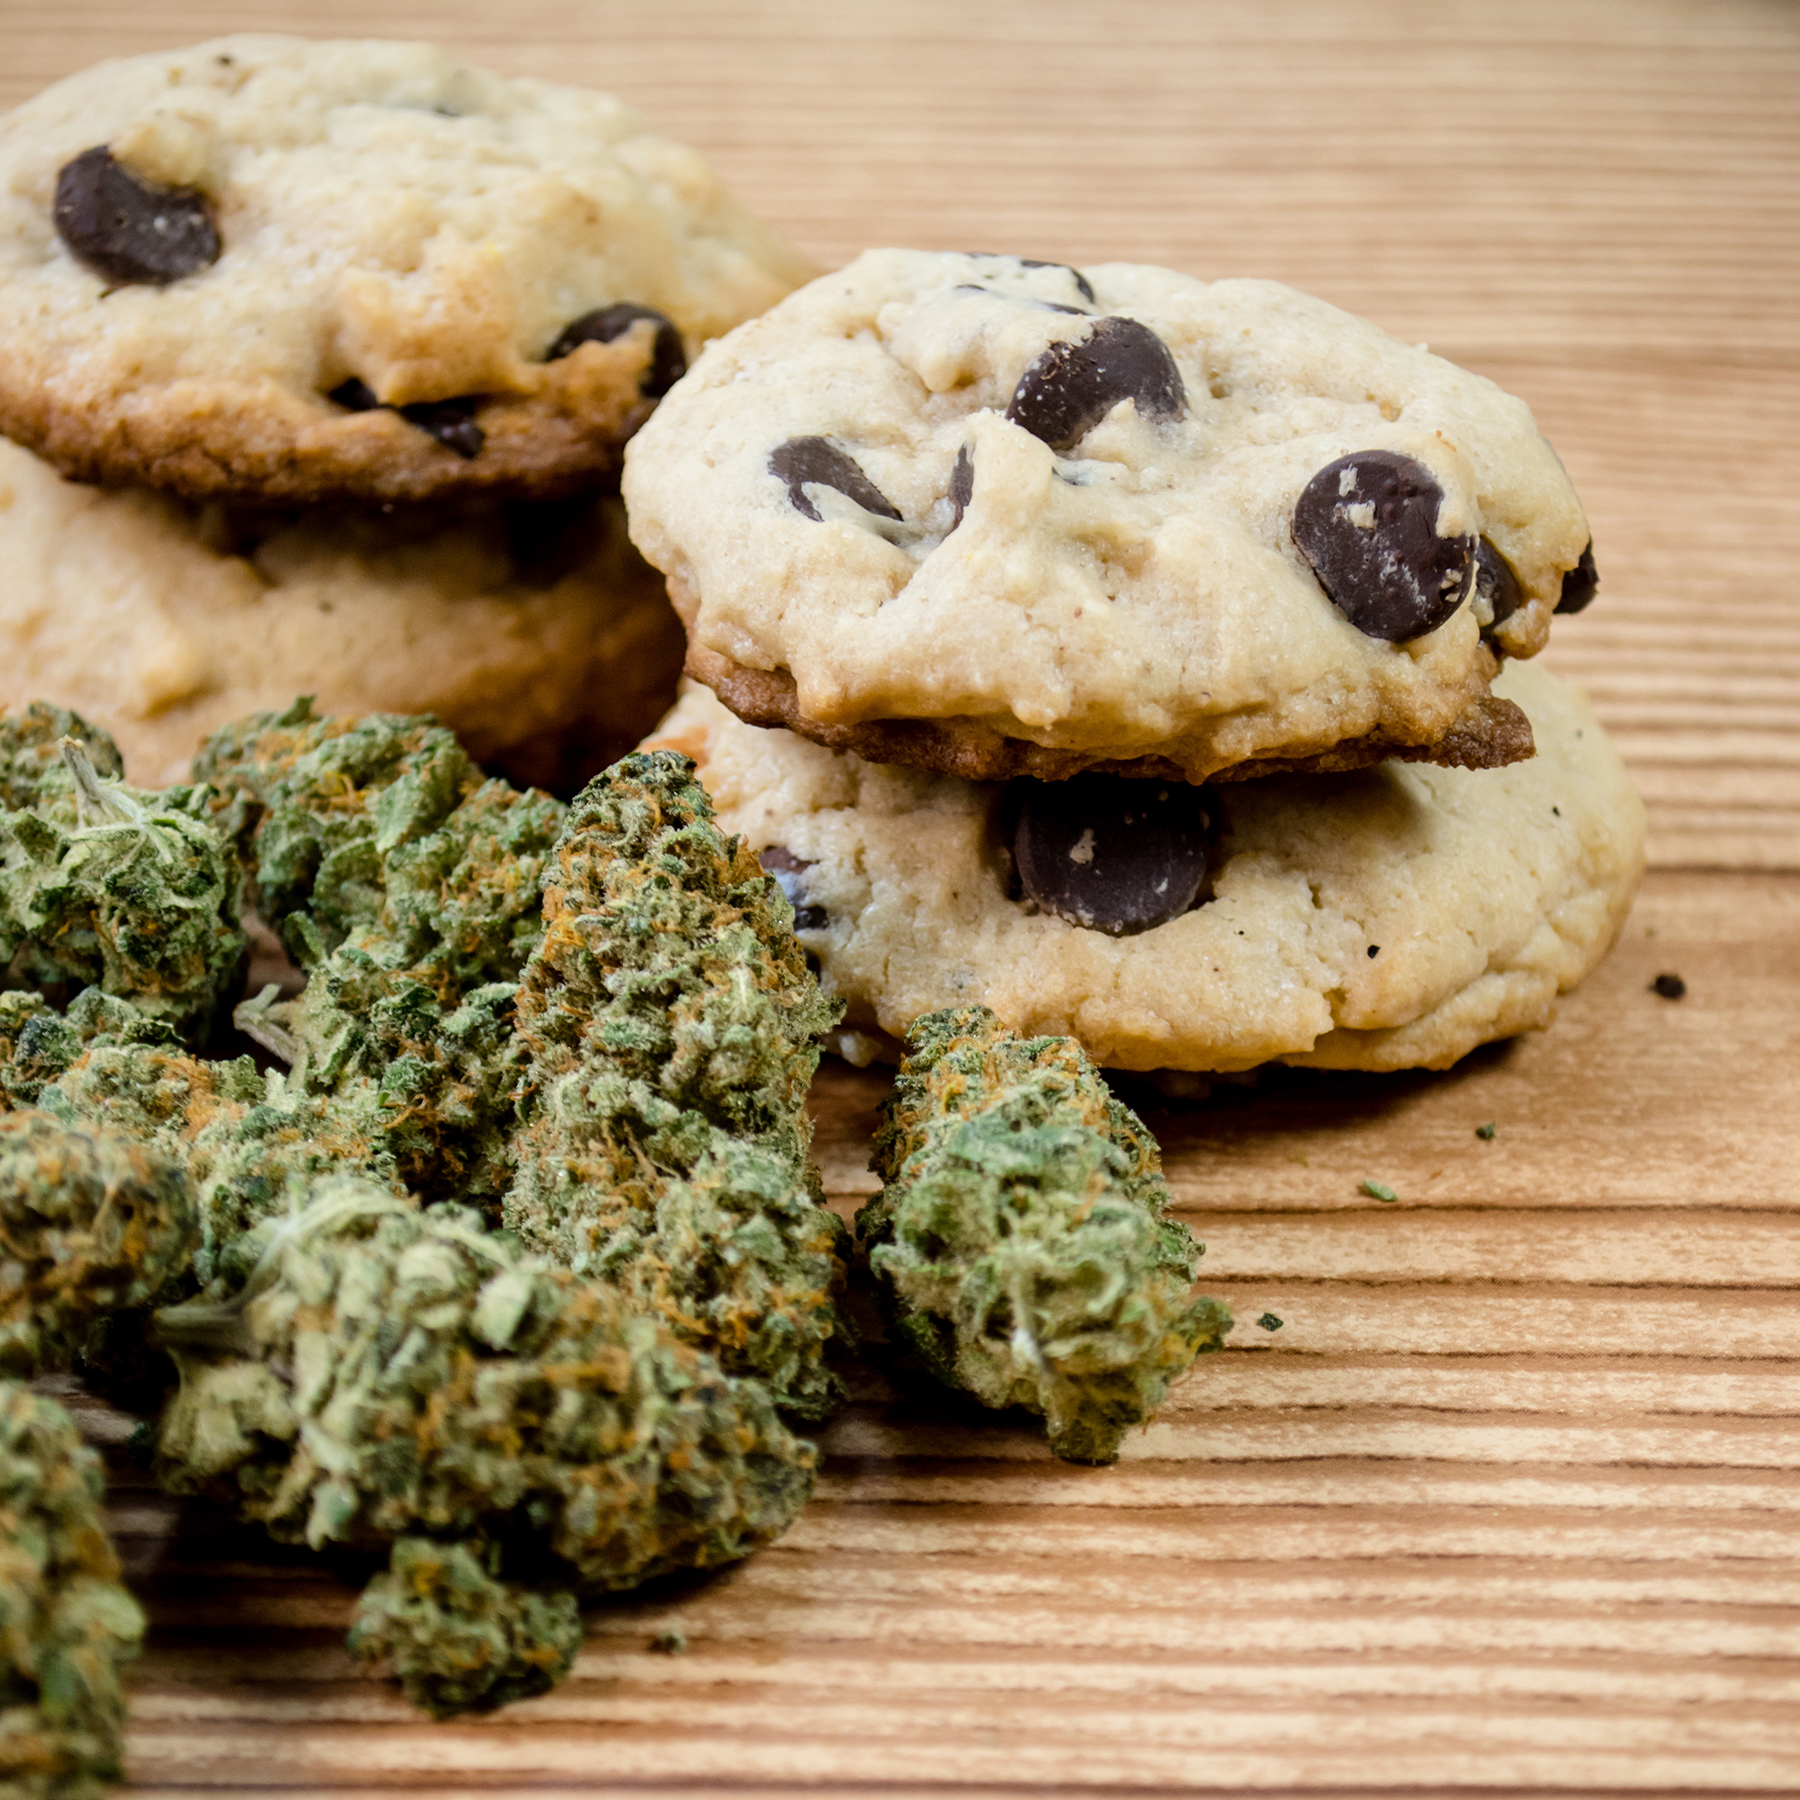 Chocolate chip cookies and pot